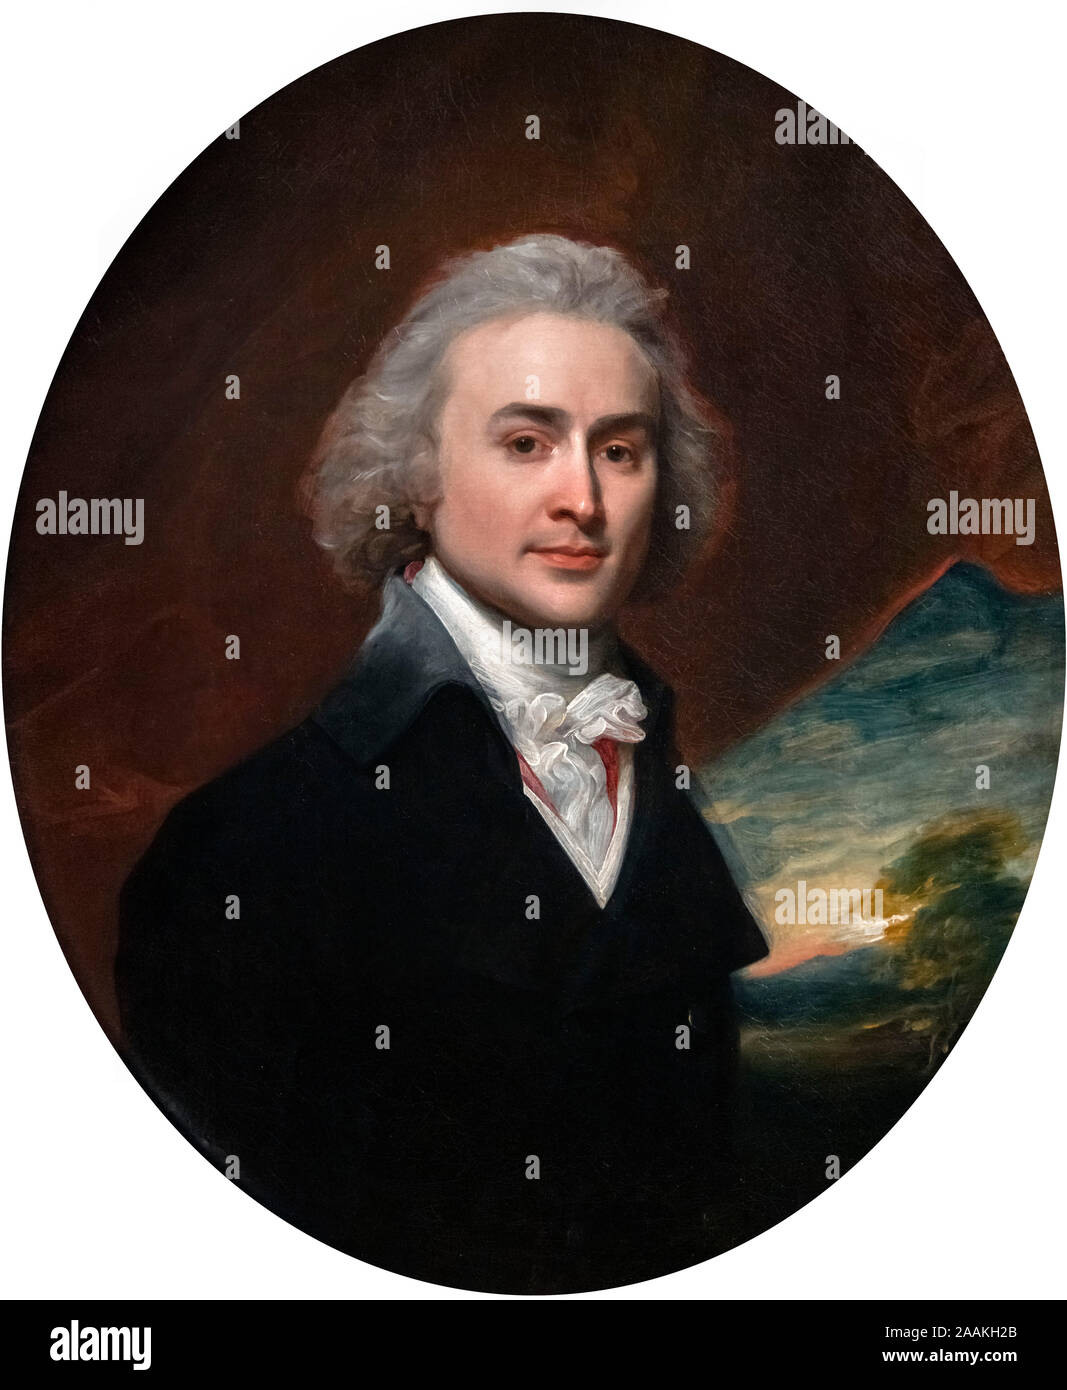 John Quincy Adams (1767-1848) at the age of 28. Portrait of the 6th US President as a young man by John Singleton Copley (1738-1815), oil on canvas, 1796. Stock Photo